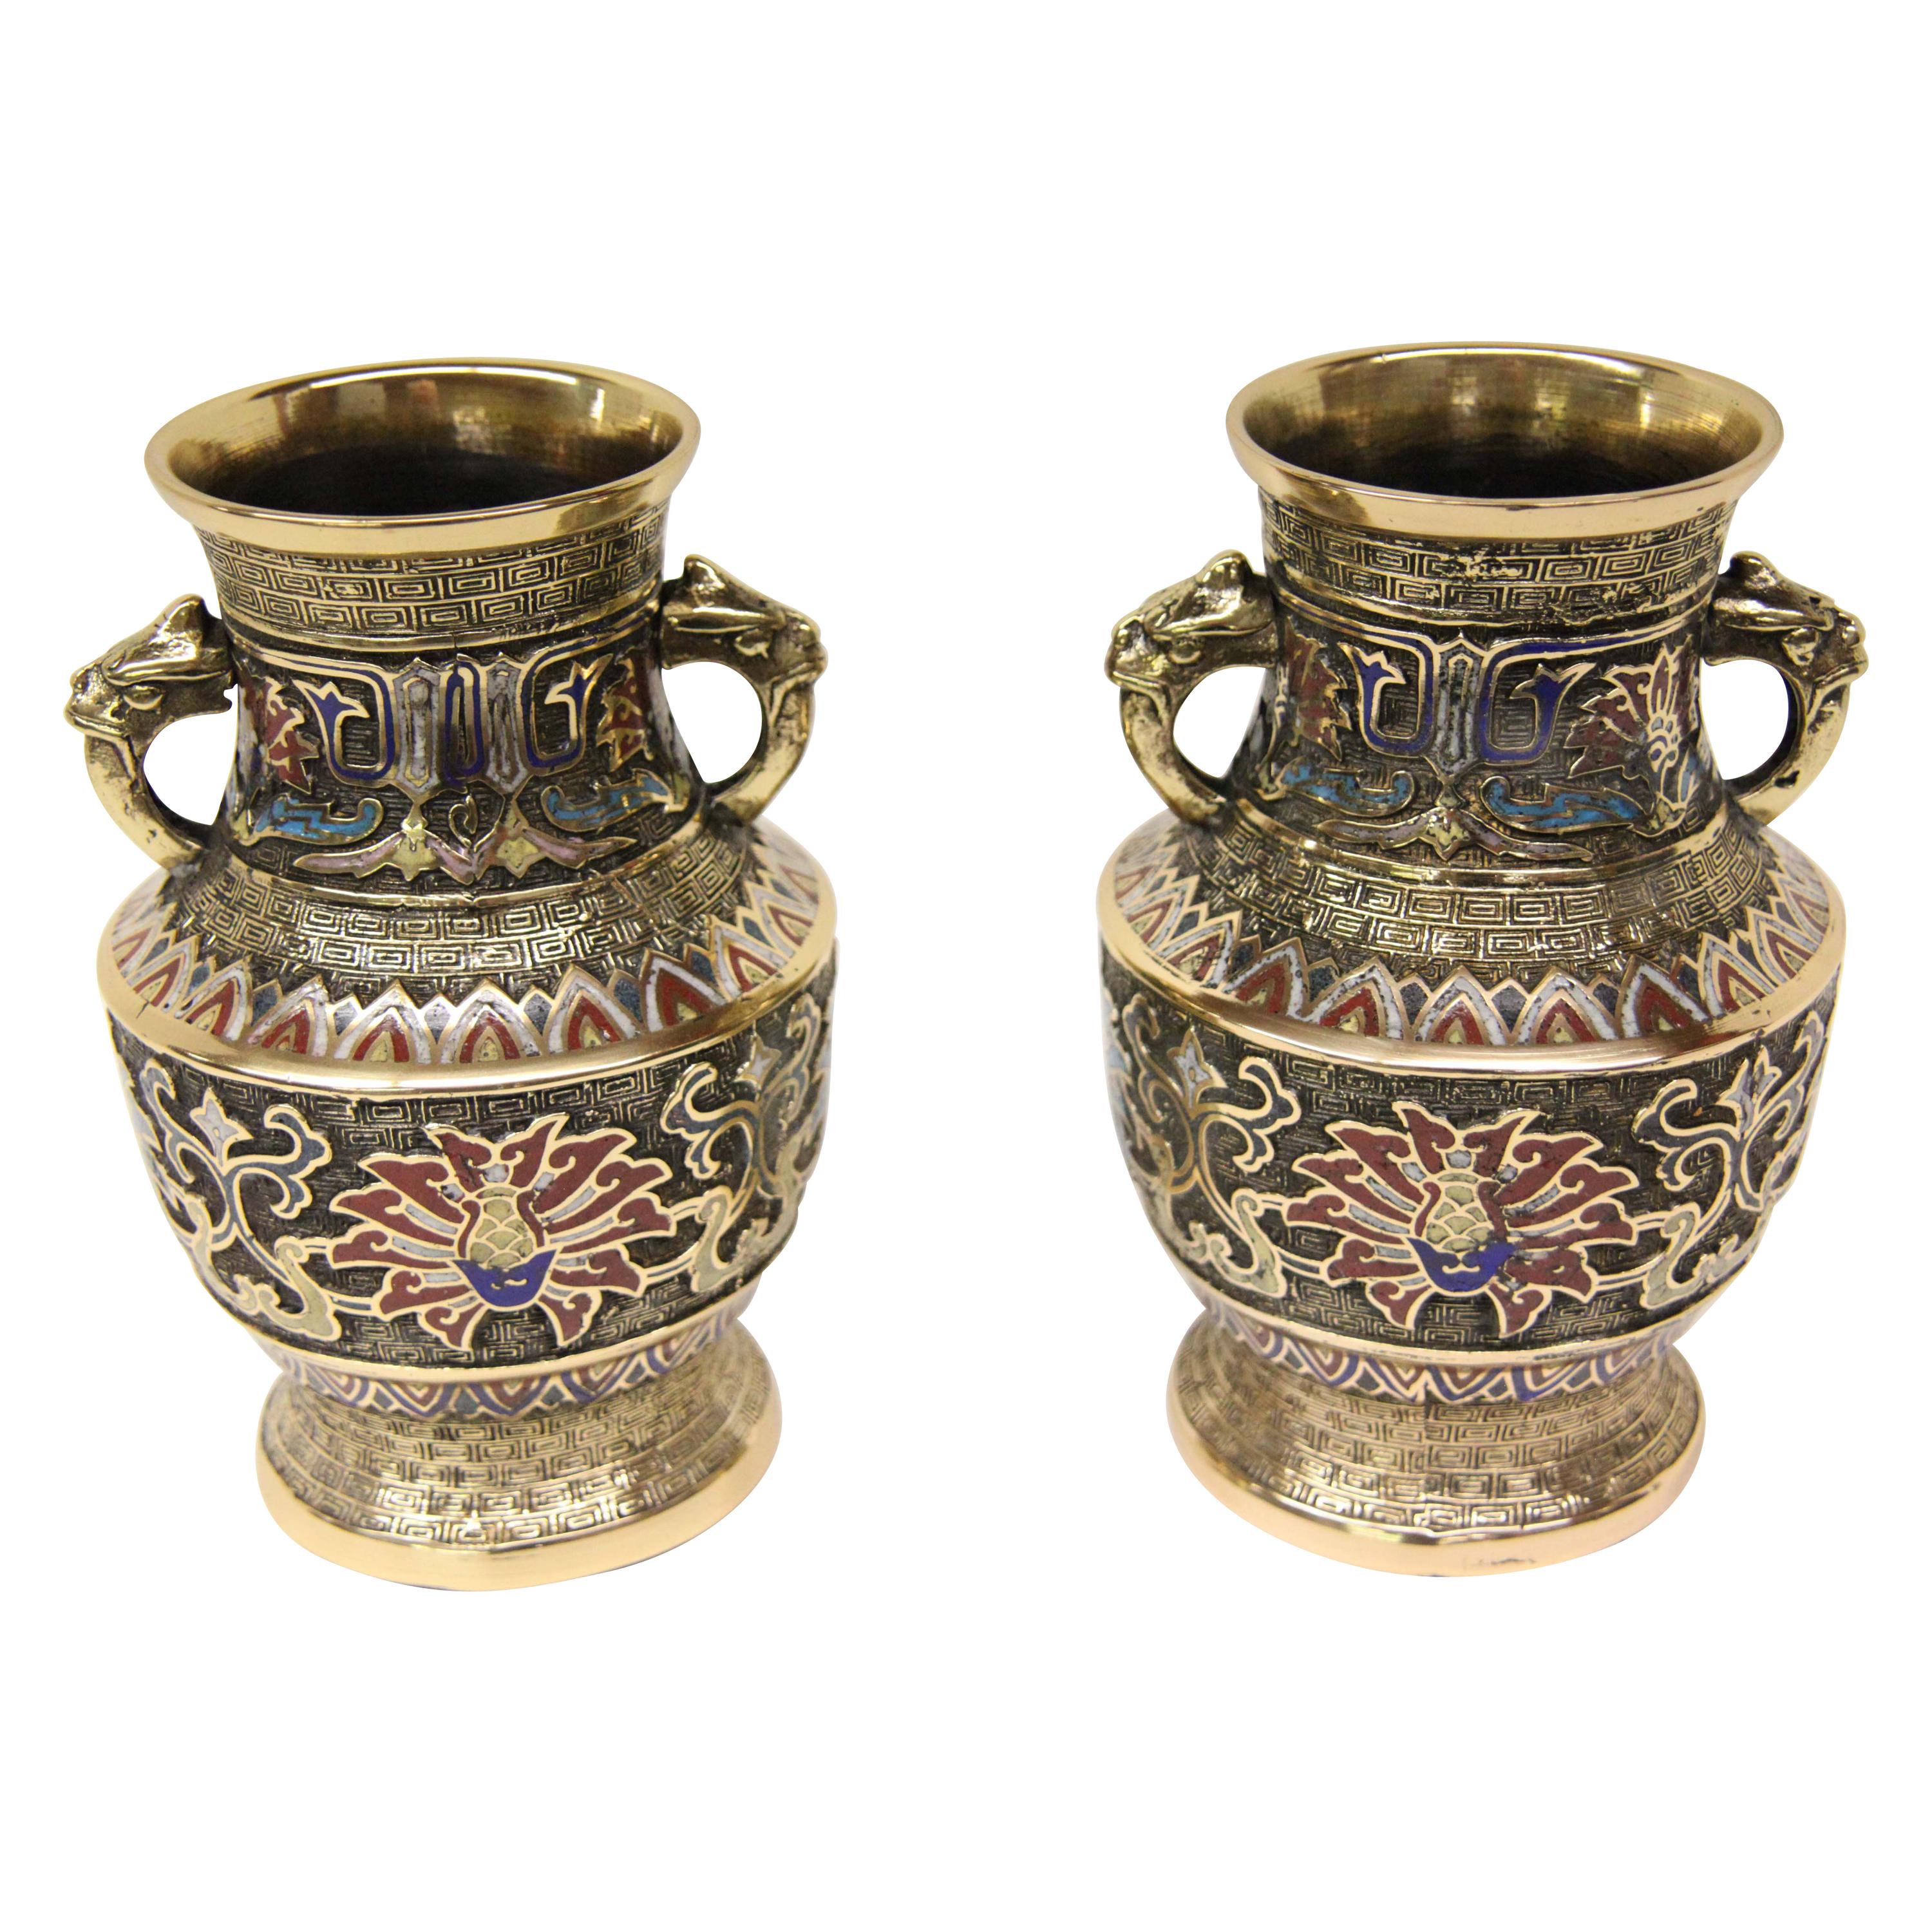 Pair of Japanese Brass and Enamel Champleve Vases